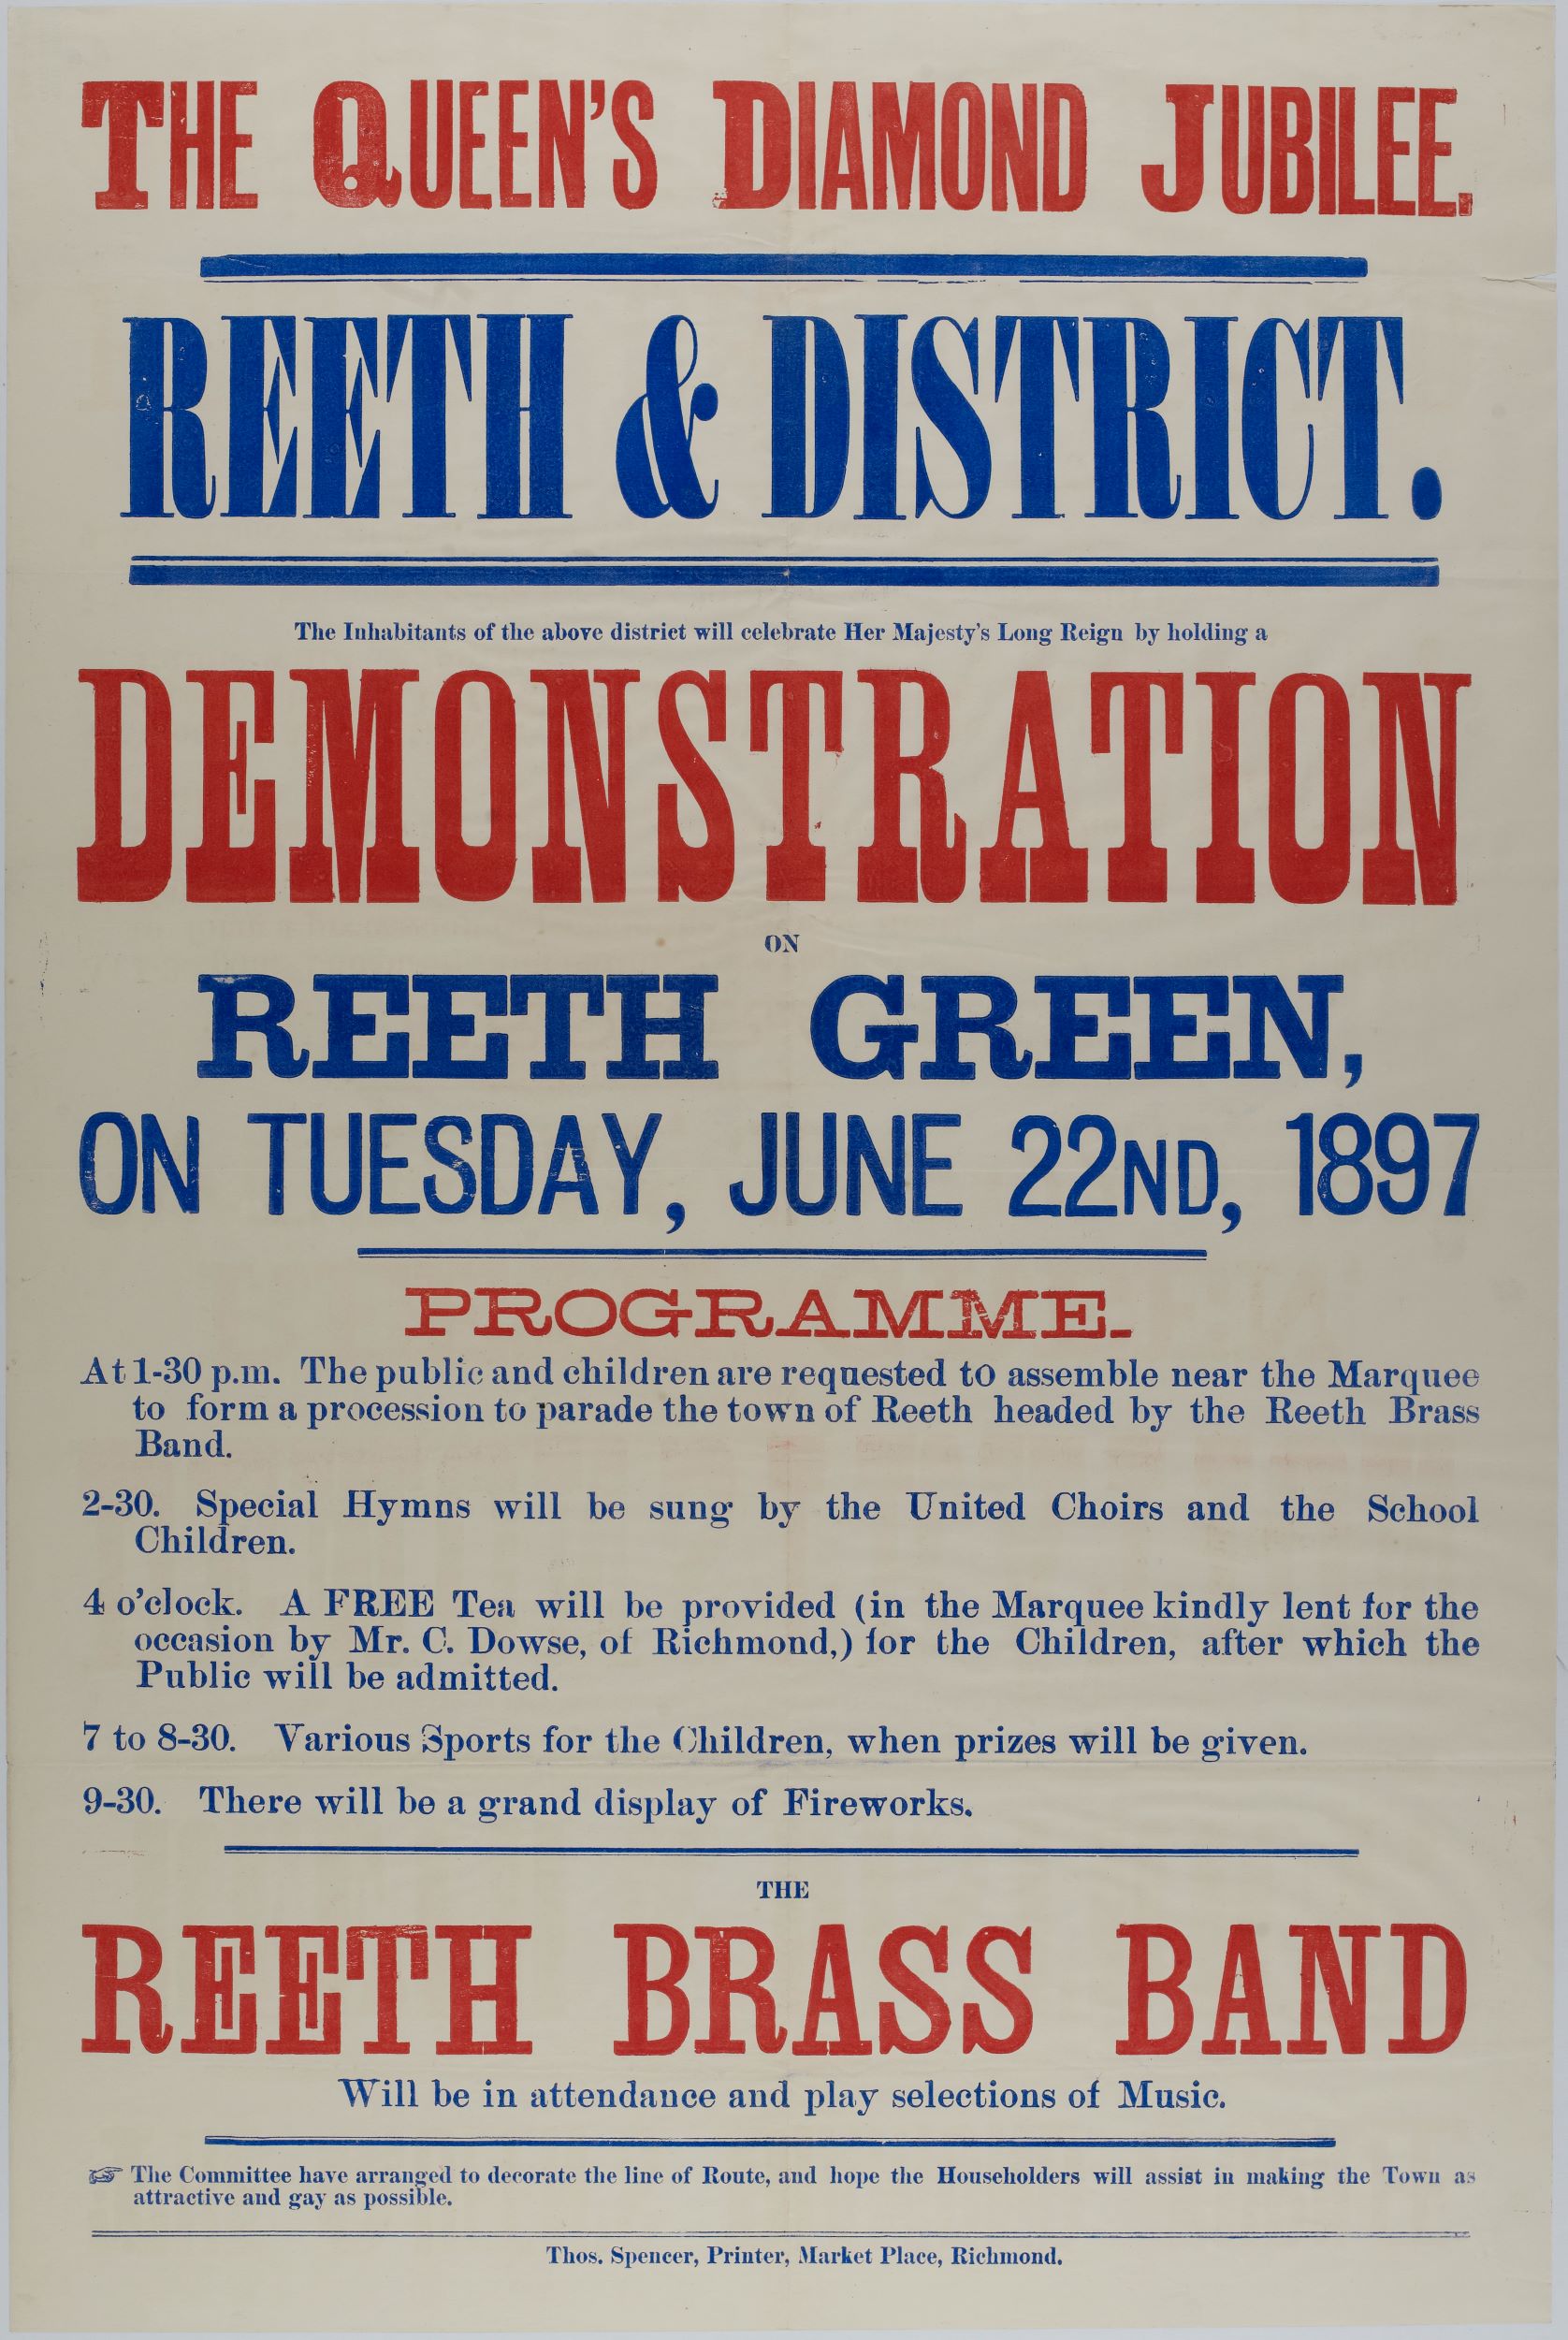 •	A poster advertising celebrations at Reeth for the Diamond Jubilee of Queen Victoria in June 1897